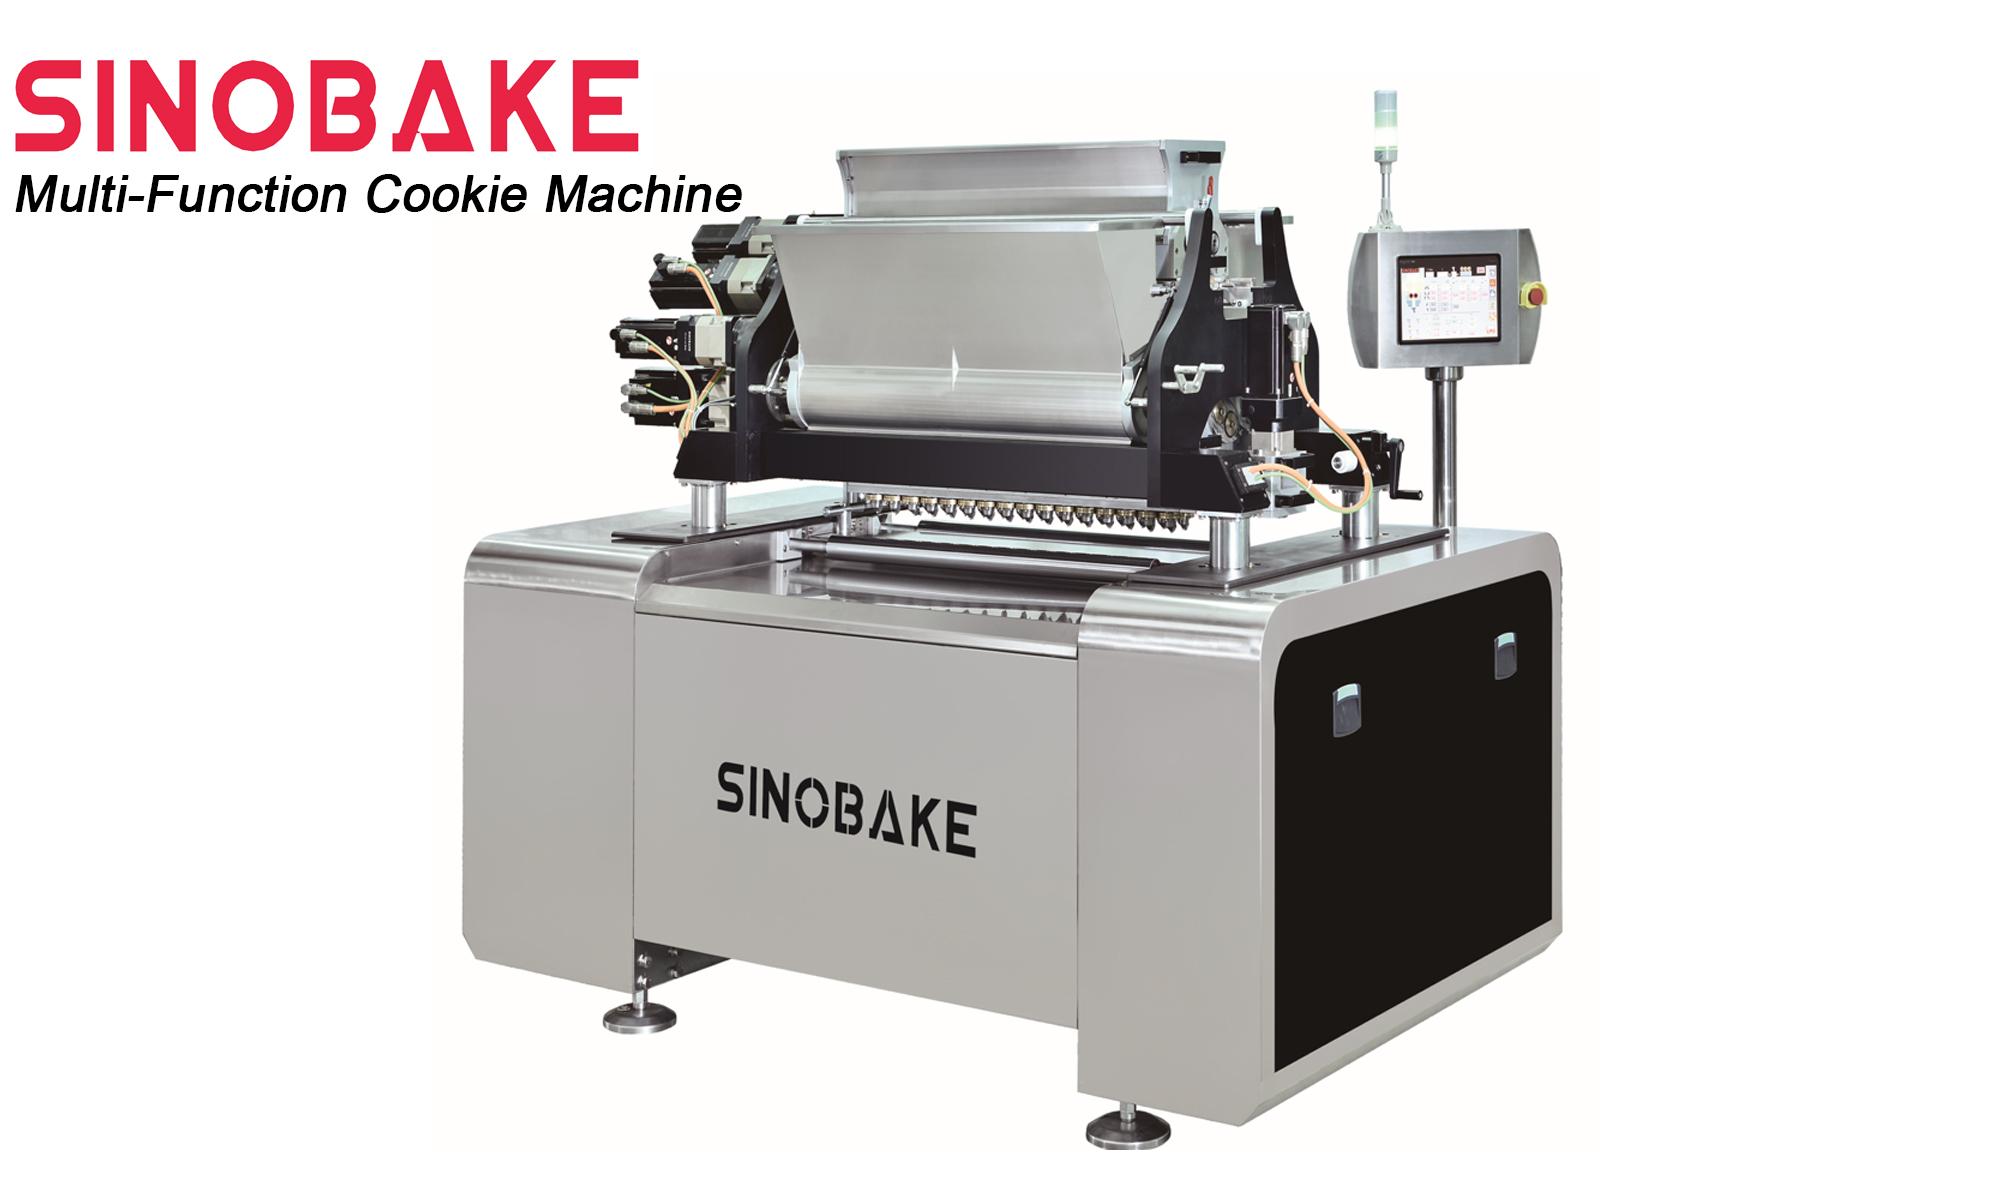 Sinobake Cookie Machine Review: A Device Designed To Simplify Cookies & Biscuits Making